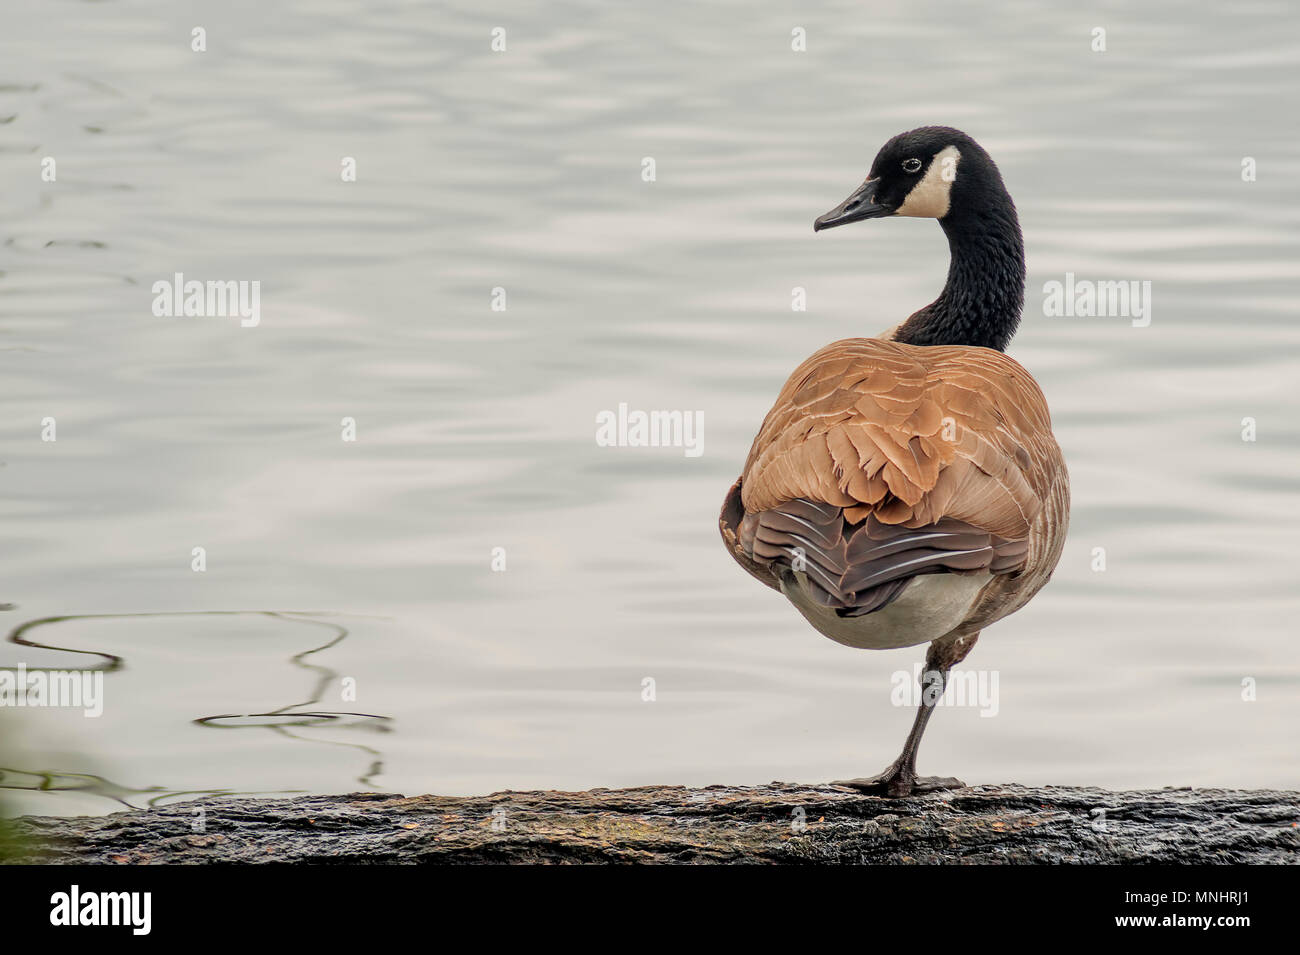 Canada Goose balancing on one leg in this minimalist. Stock Photo